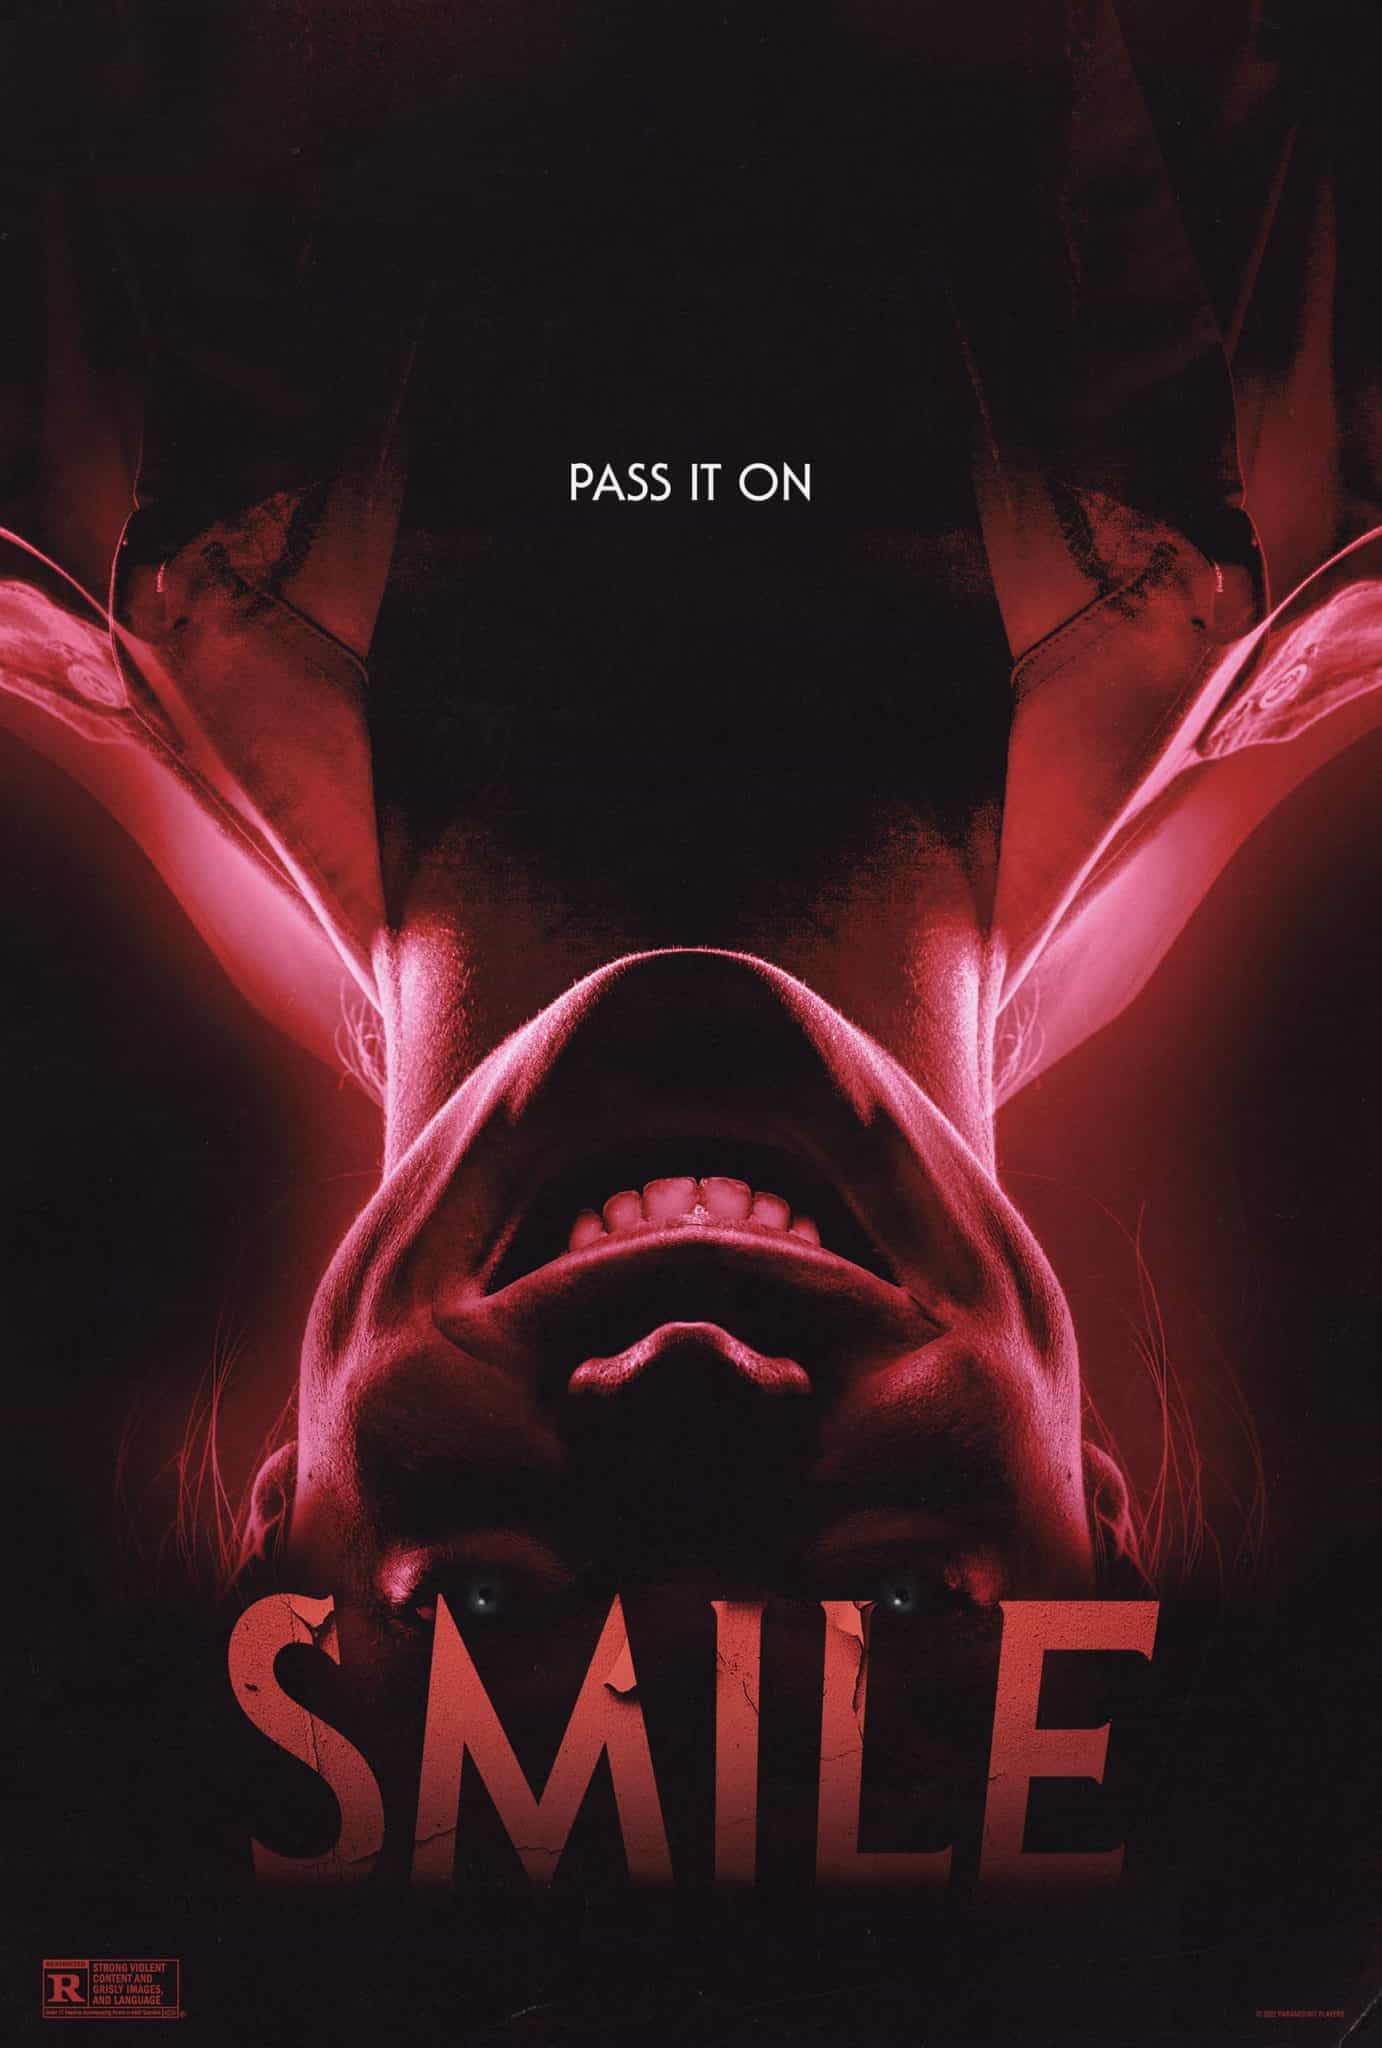 UK Box Office Weekend Report 7th - 9th October 2022:  Smile stays on top for a second weekend as The Woman King enters at number 2